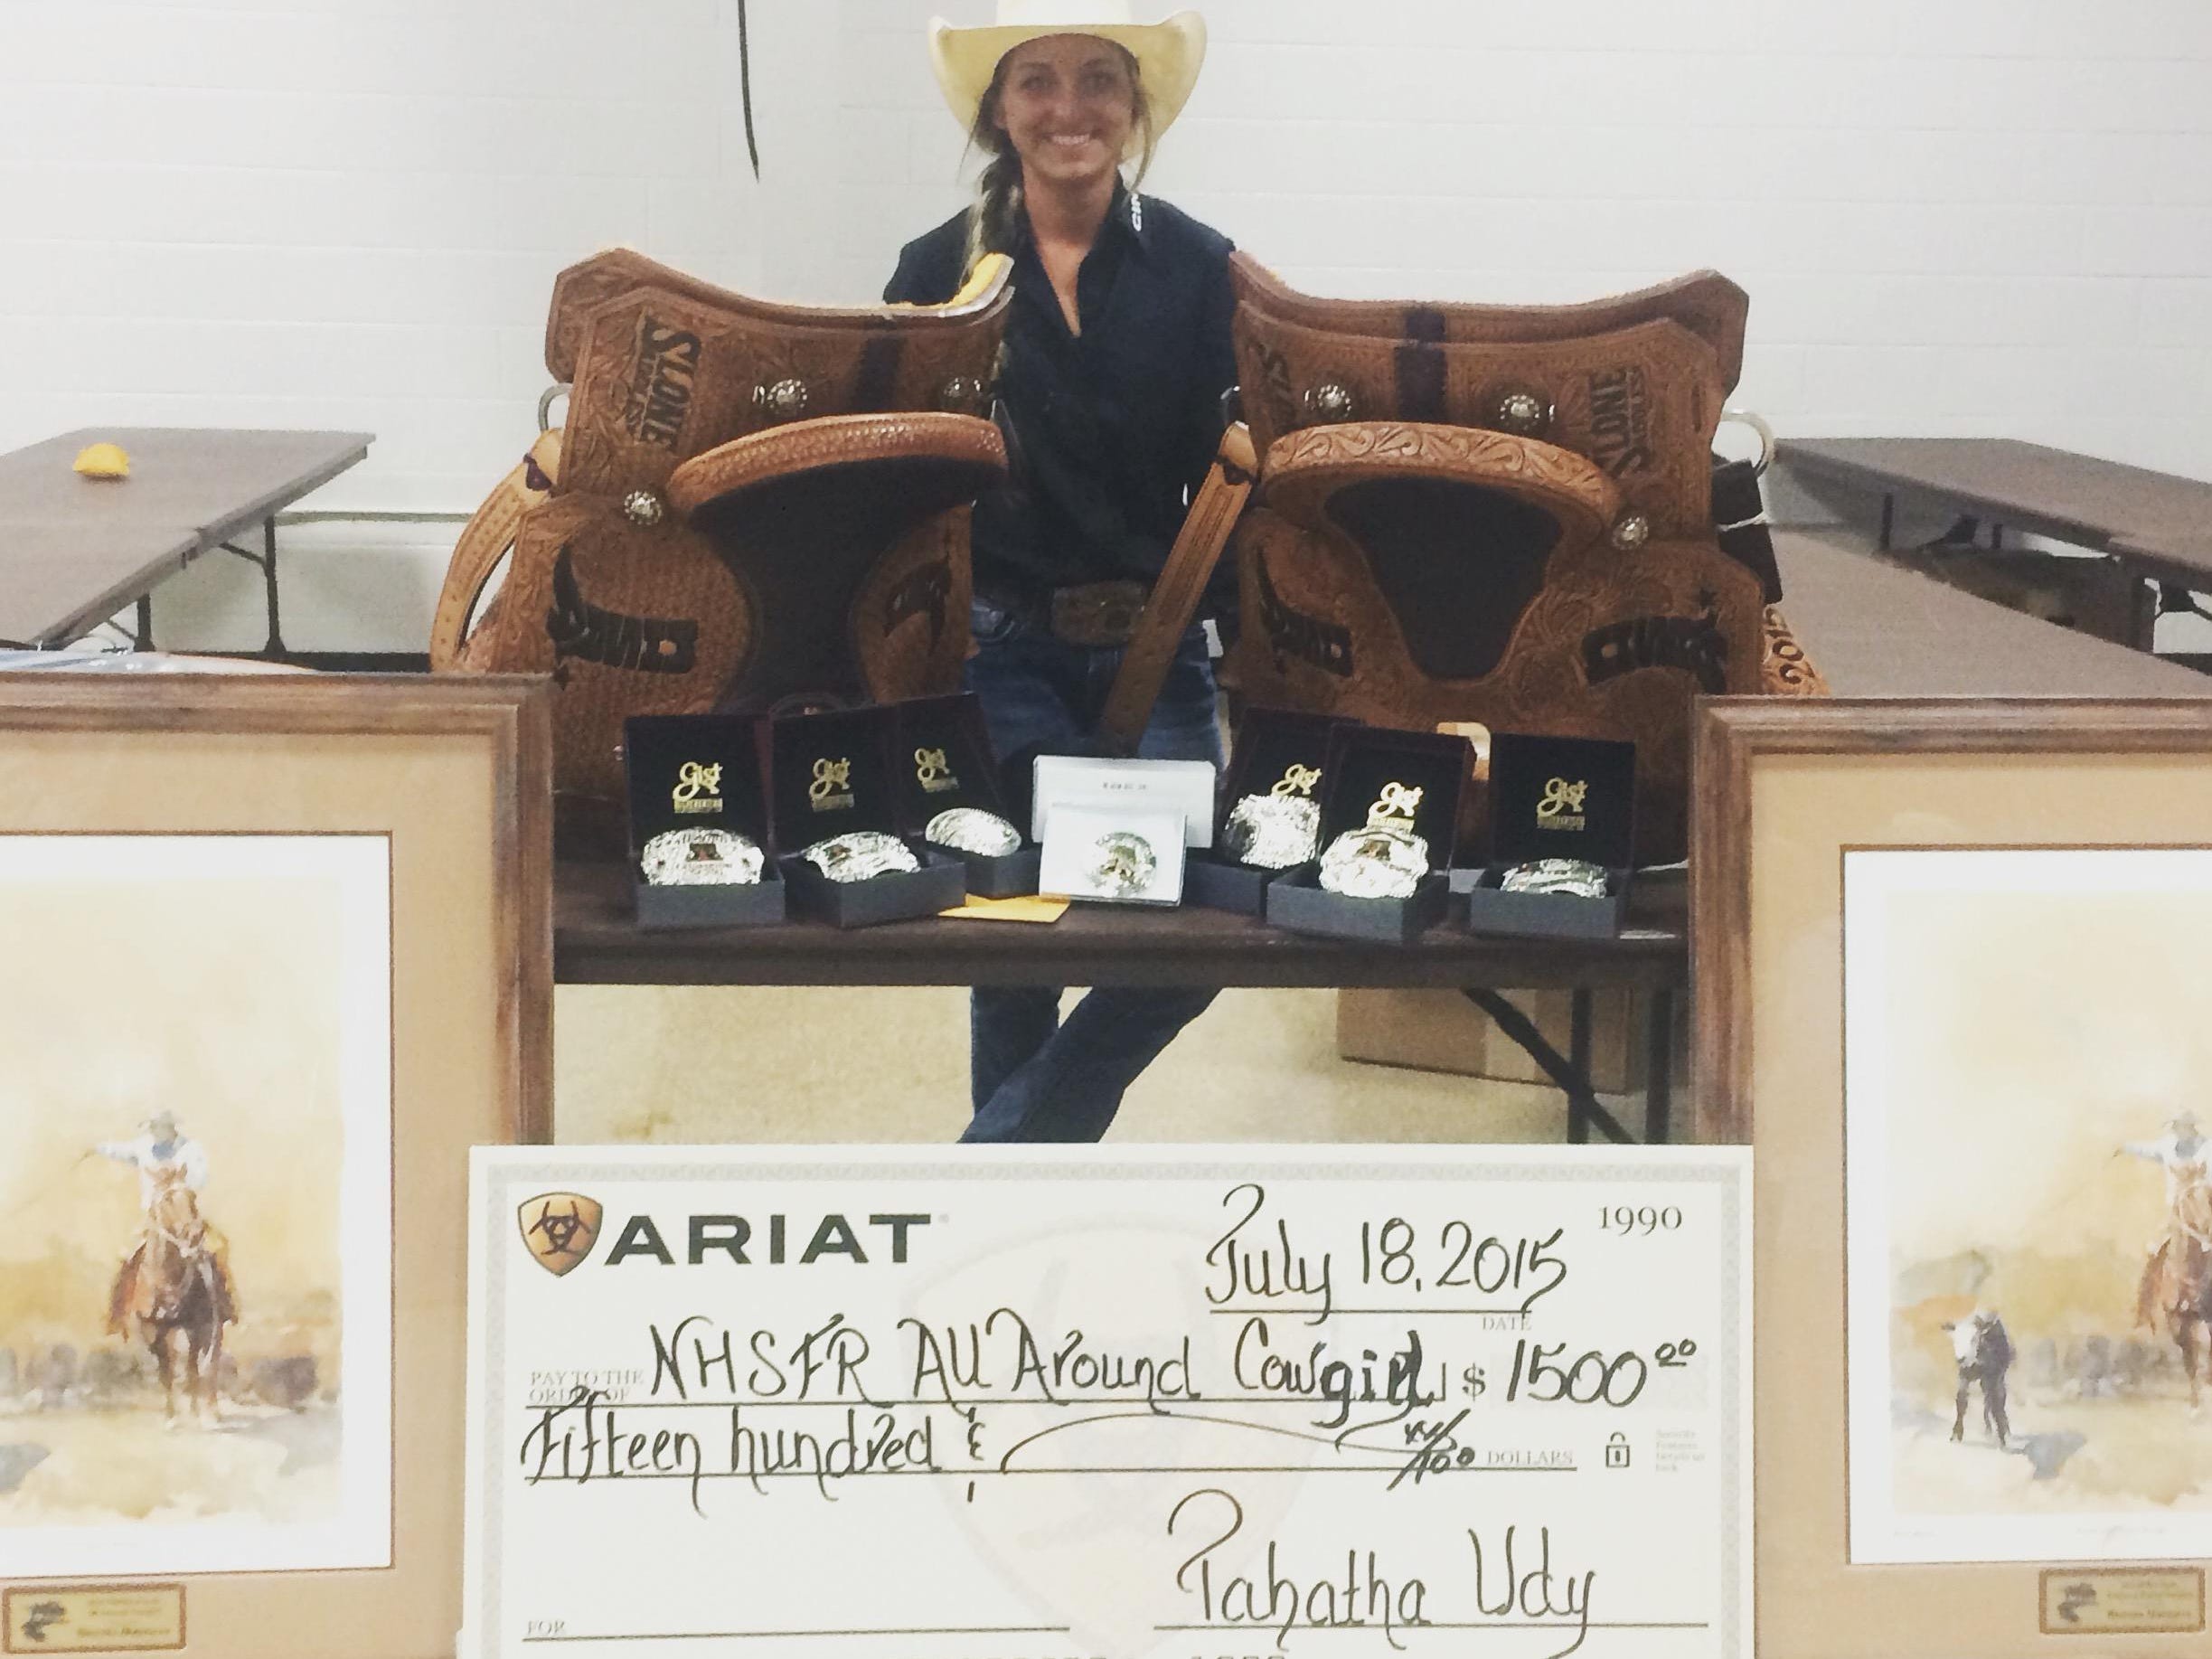 Kaytlyn Miller won the national championship as the All-Around Cowgirl at the National High School Finals Rodeo on July 18.